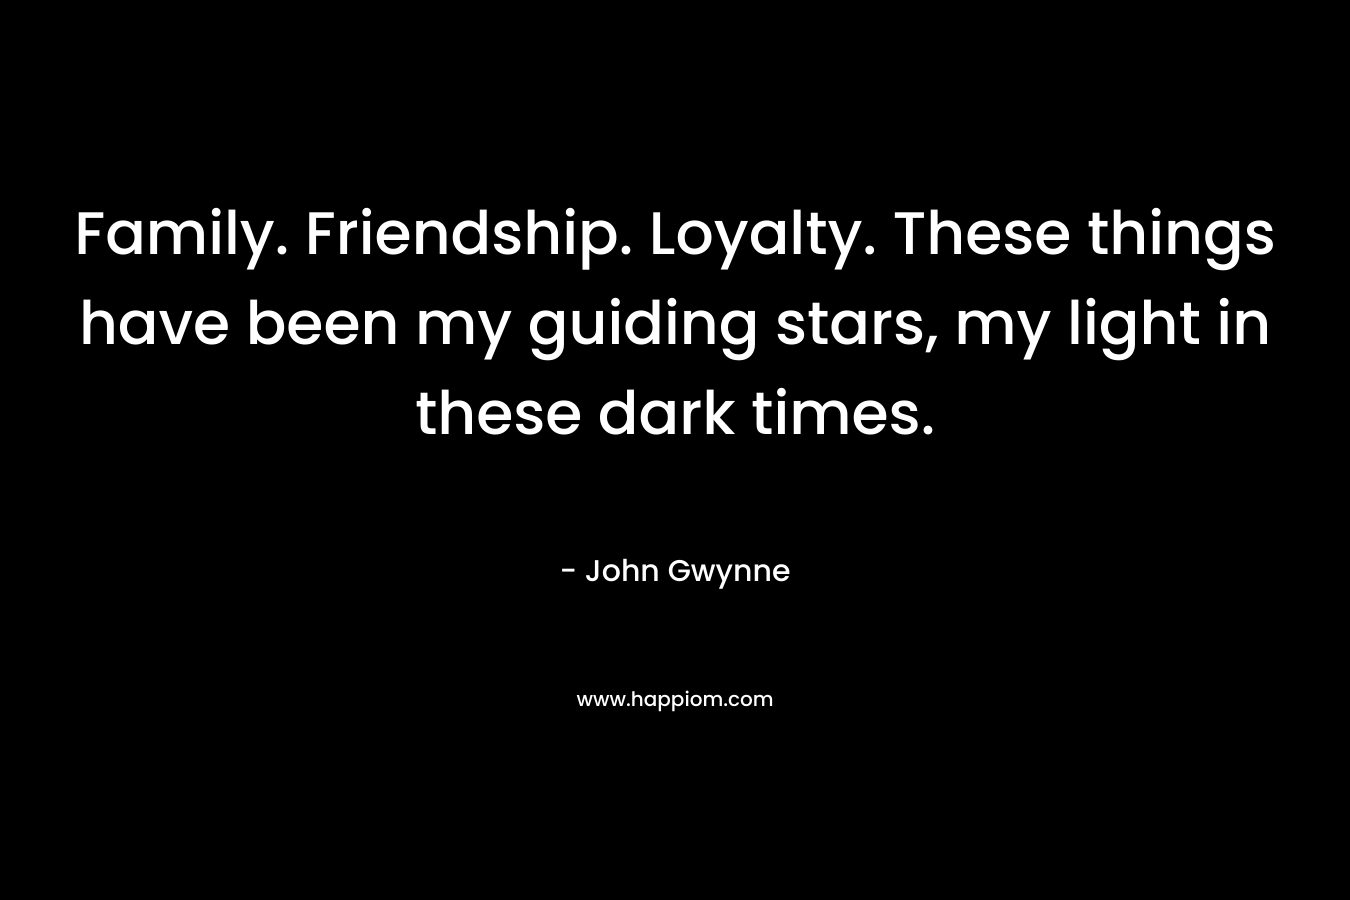 Family. Friendship. Loyalty. These things have been my guiding stars, my light in these dark times. – John Gwynne